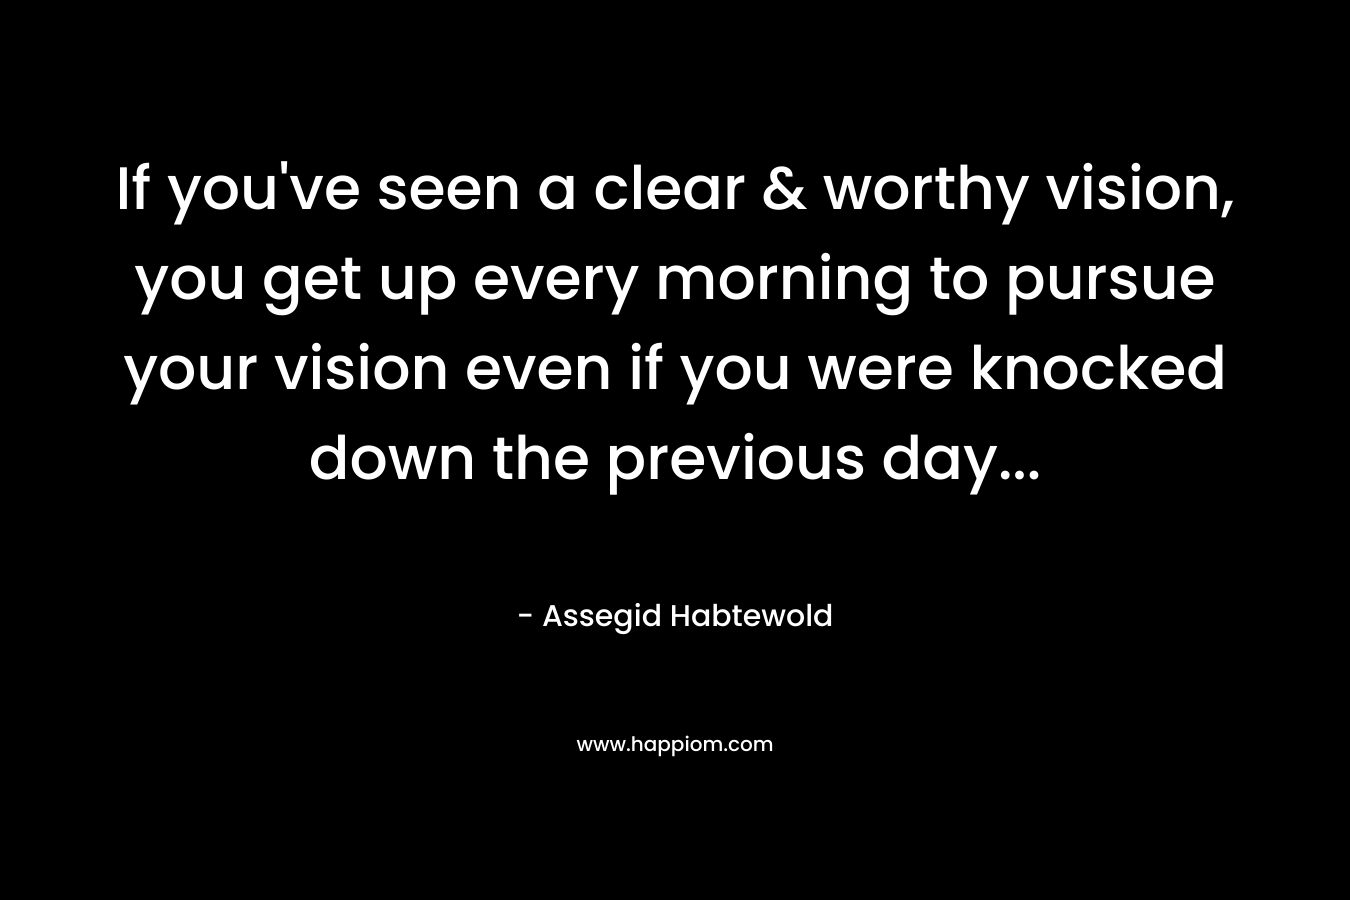 If you’ve seen a clear & worthy vision, you get up every morning to pursue your vision even if you were knocked down the previous day… – Assegid Habtewold